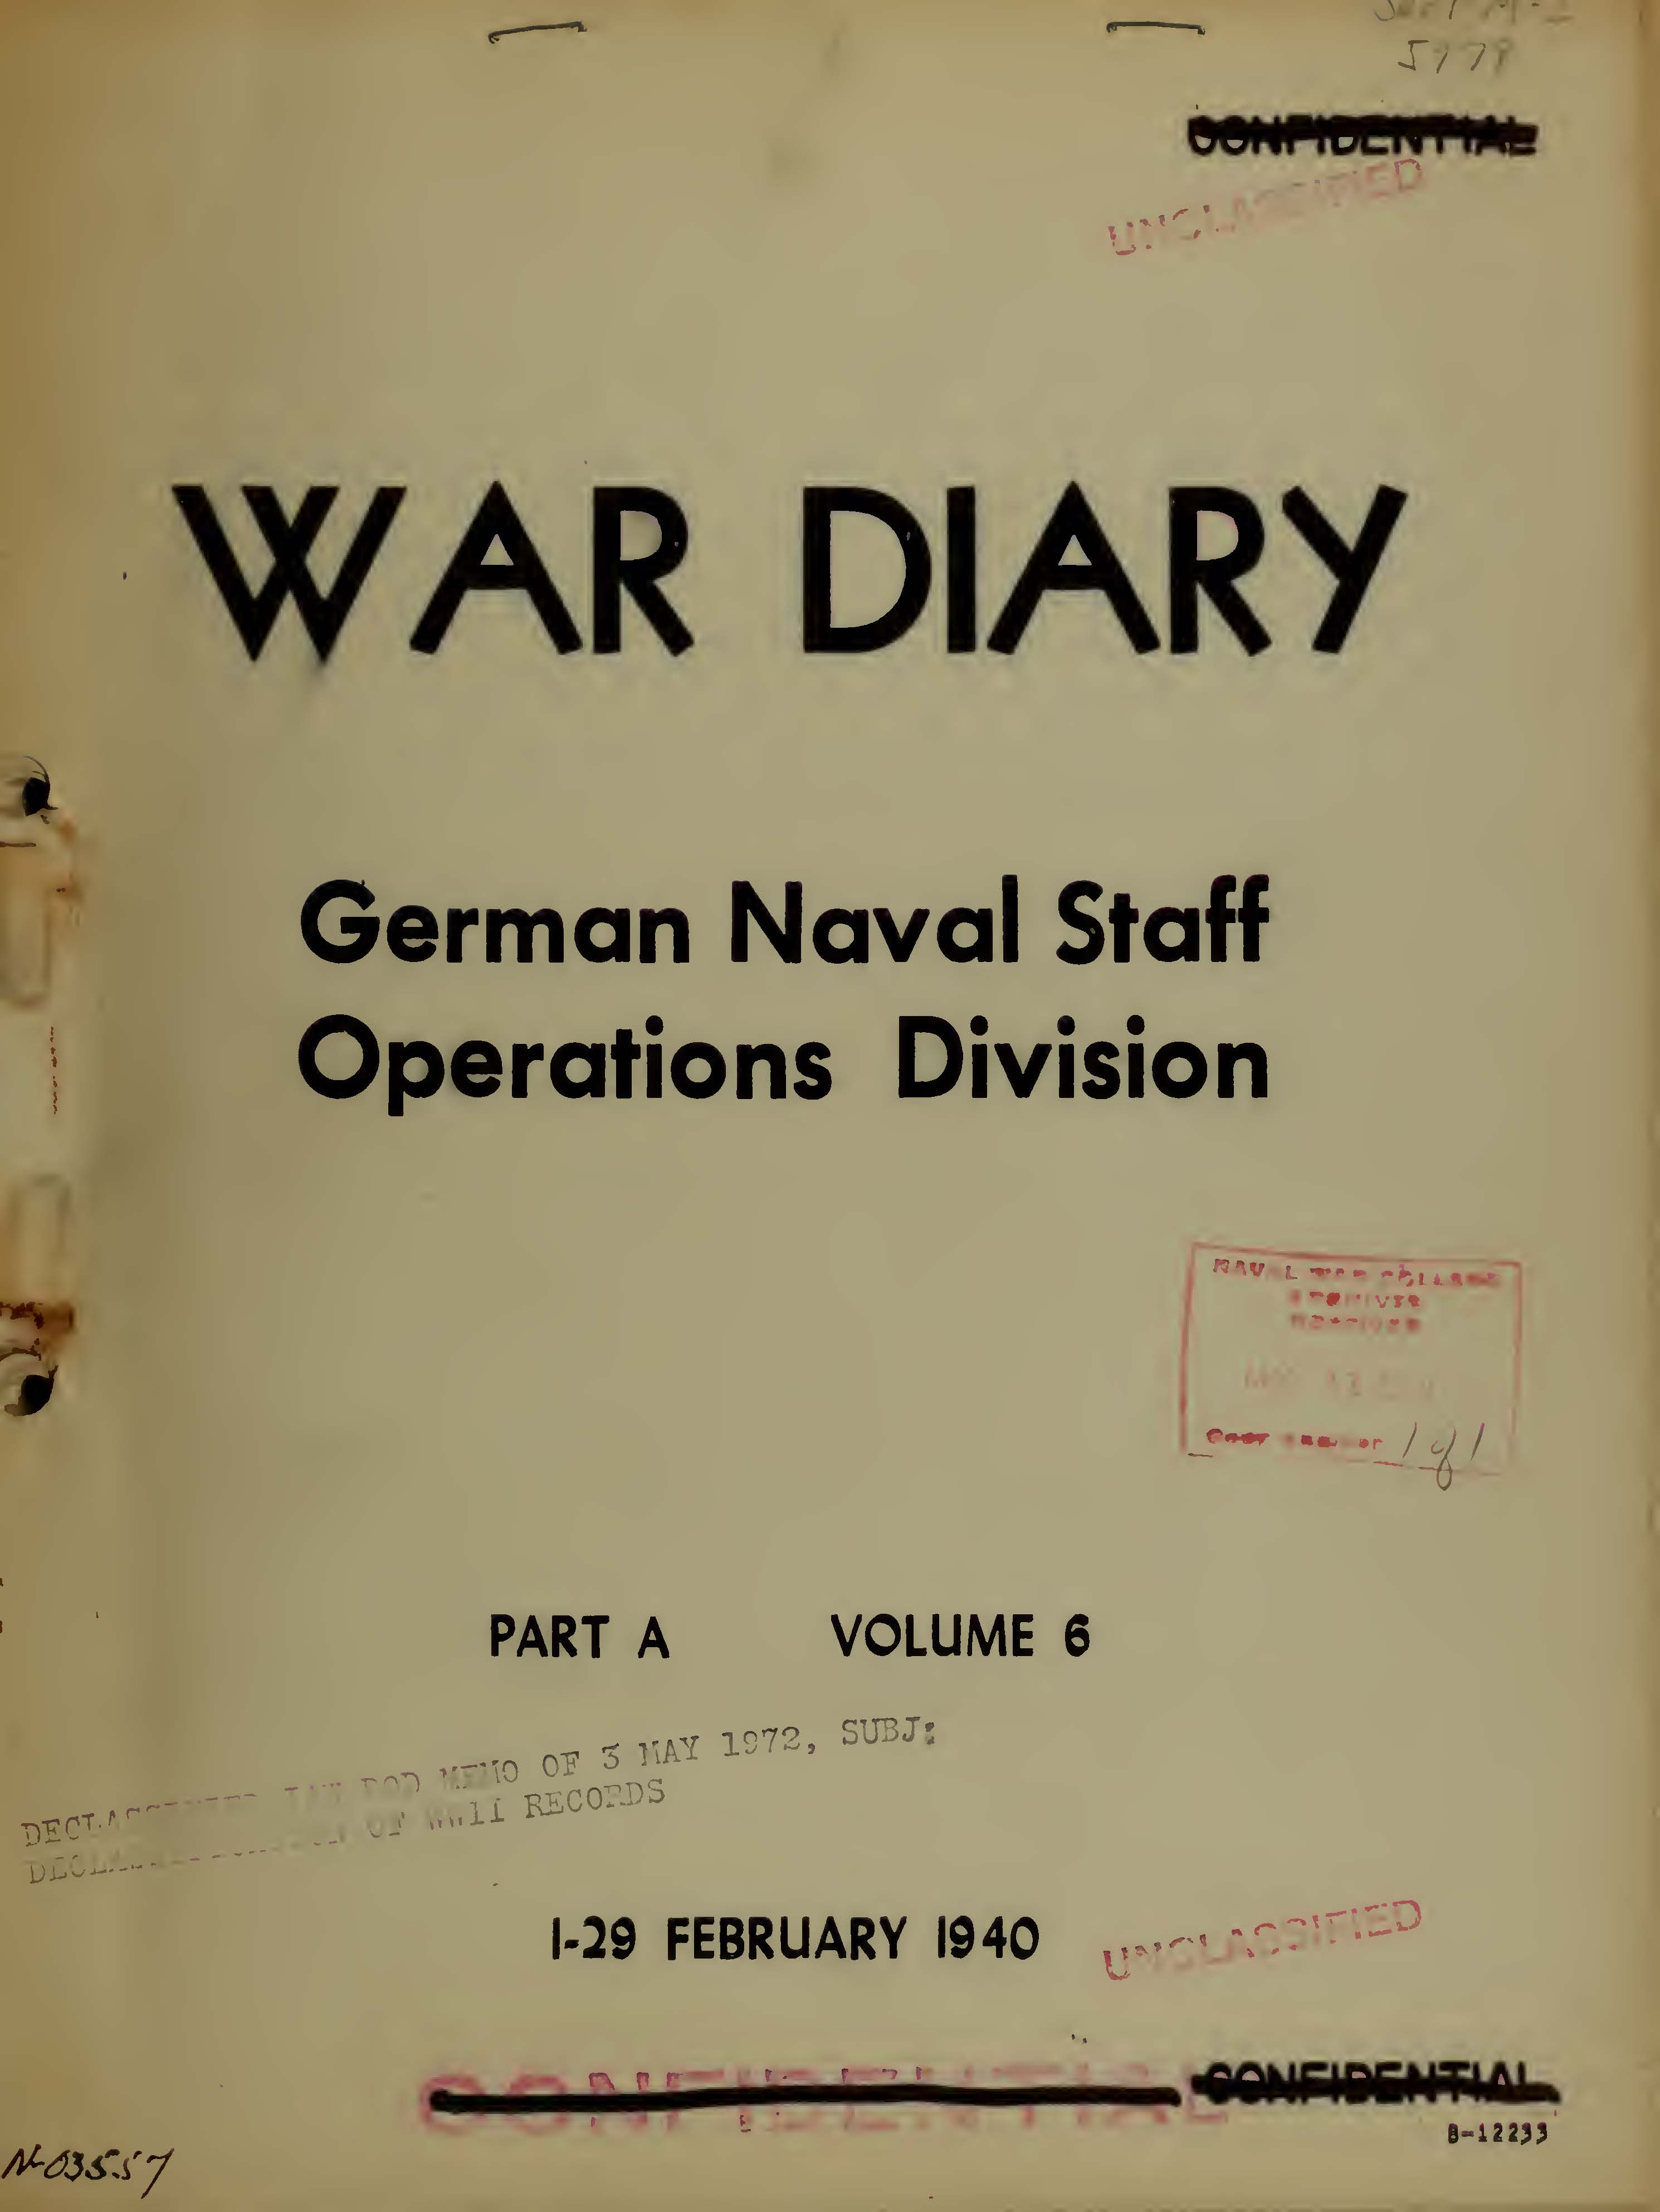 War Diary of German Naval Staff (Operations Division) Part A, Volume 6, 1-29 February 1940